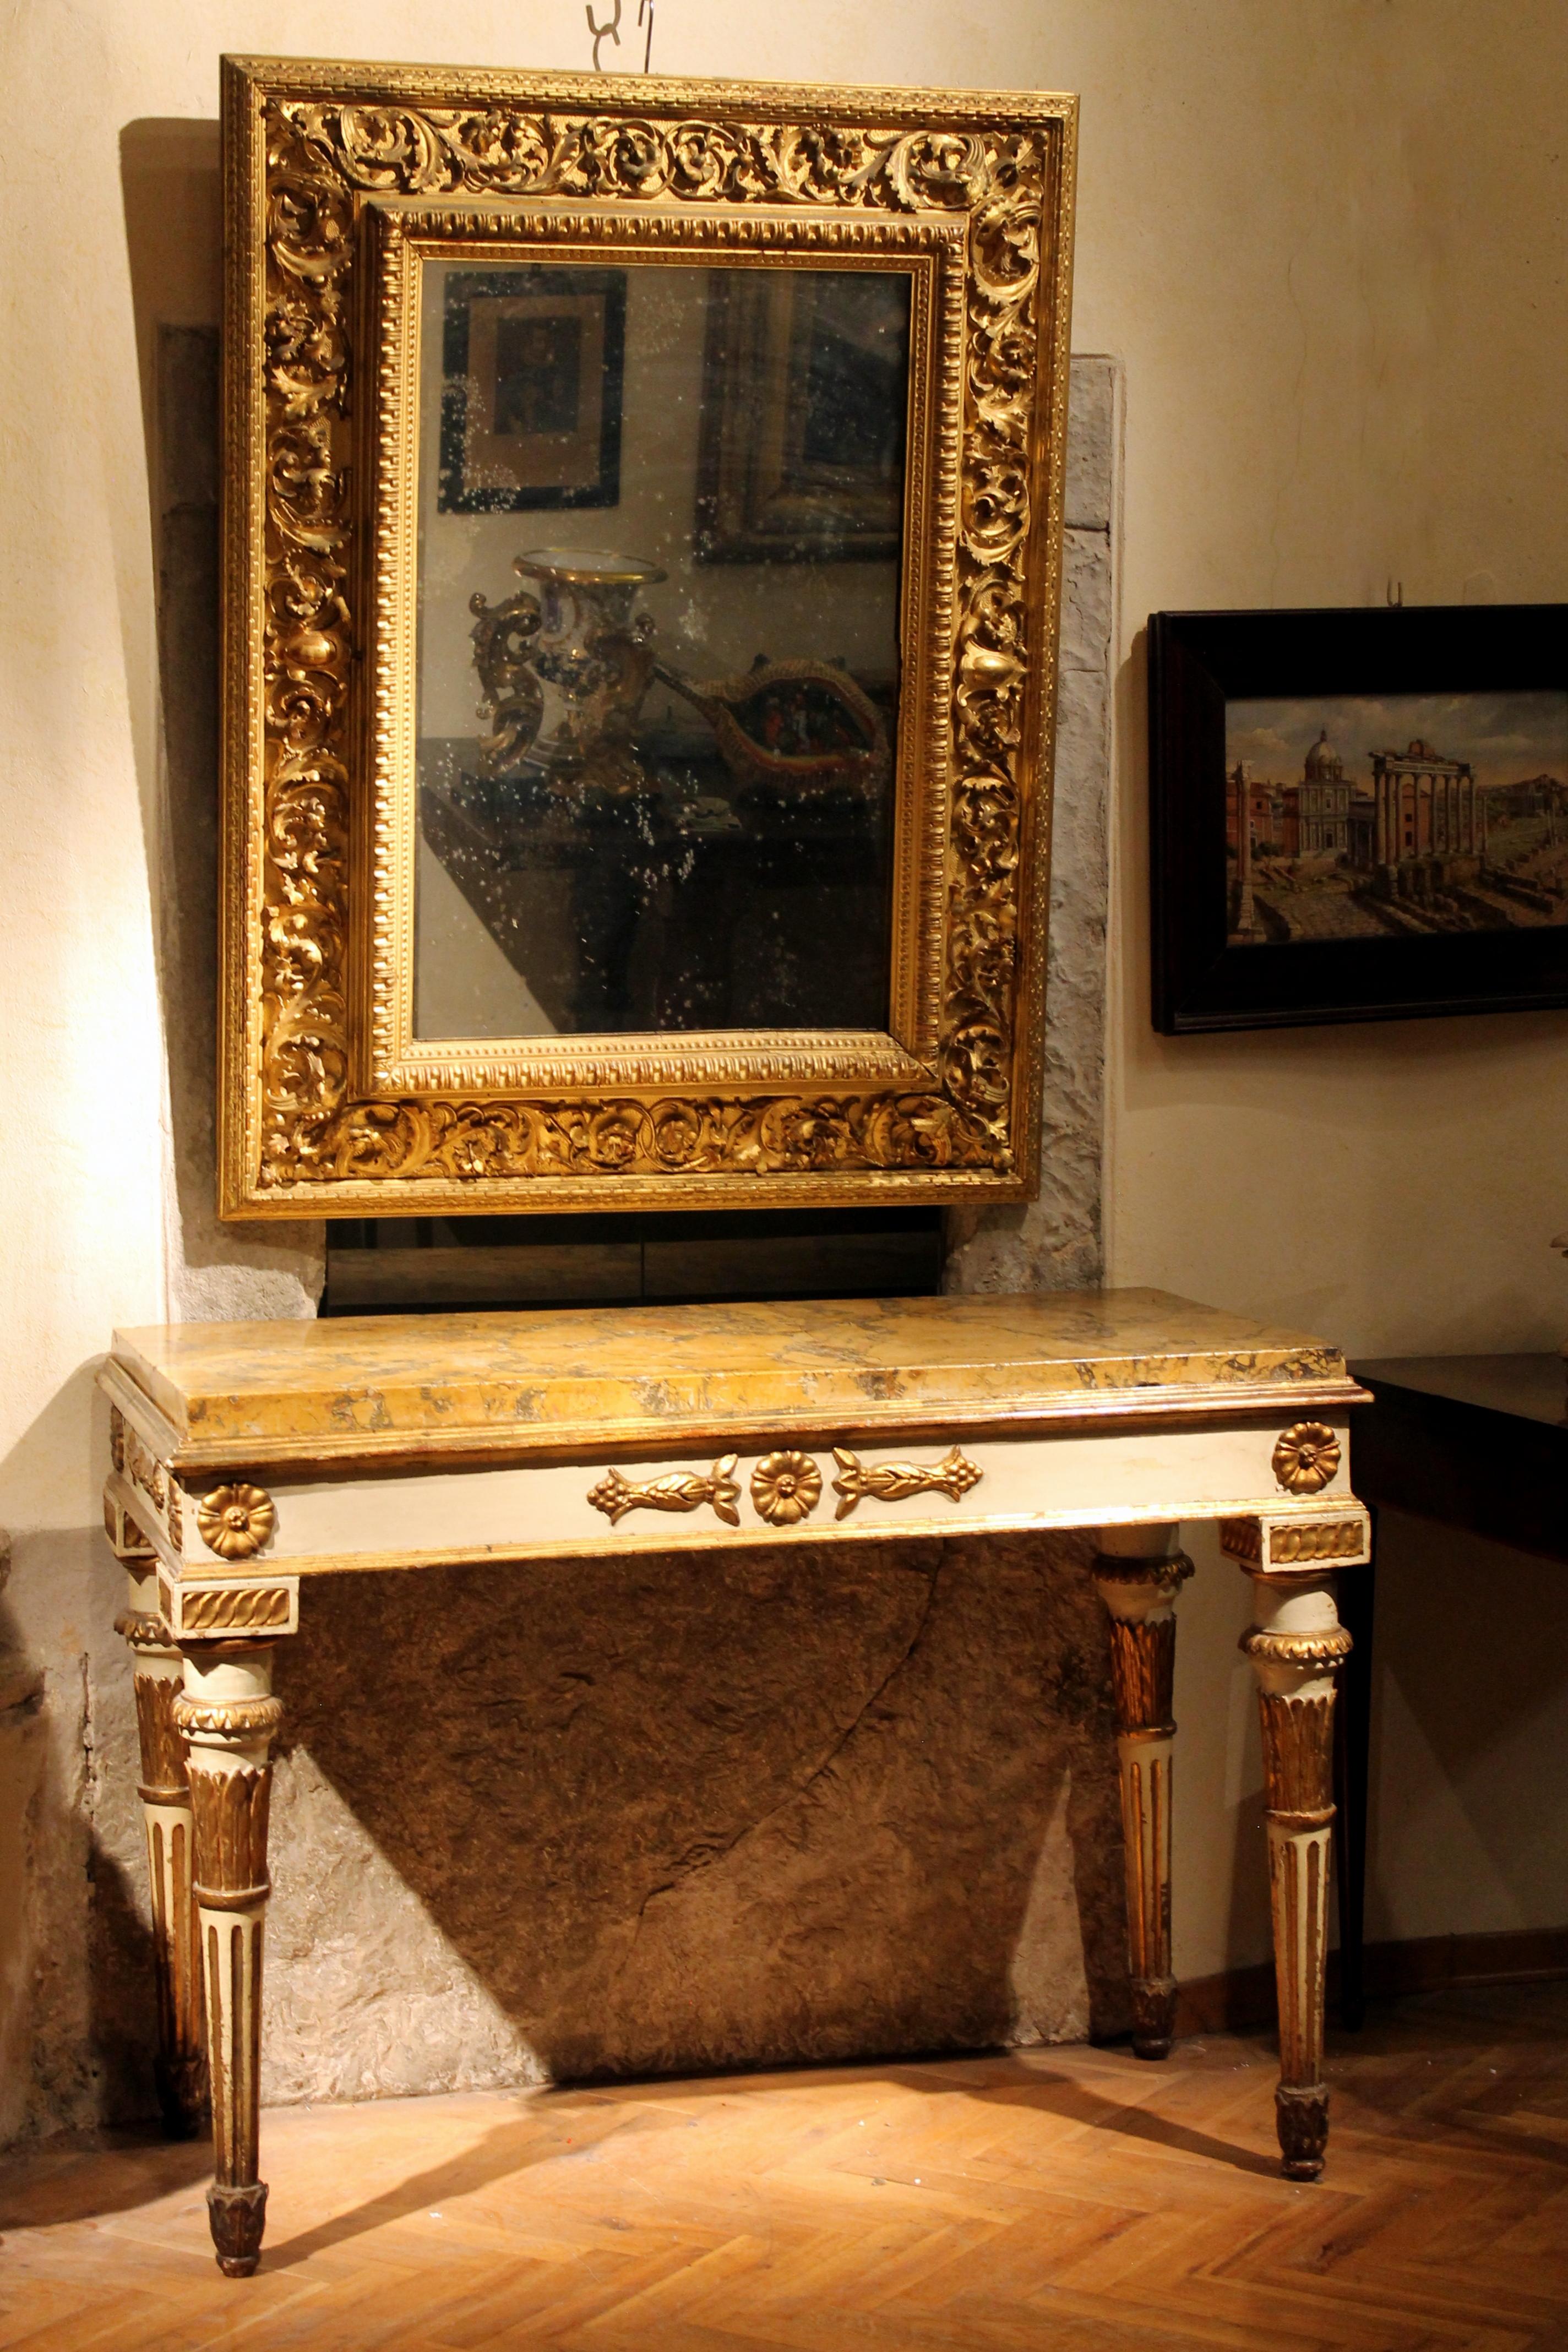 This antique Louis XVI style profusely hand carved and gilt wood frame with rectangular mercury mirror dates back to late 18th-early 19th century and was made in Northern Italy area. 
This wonderful gold leaves gilding frame features an extremely